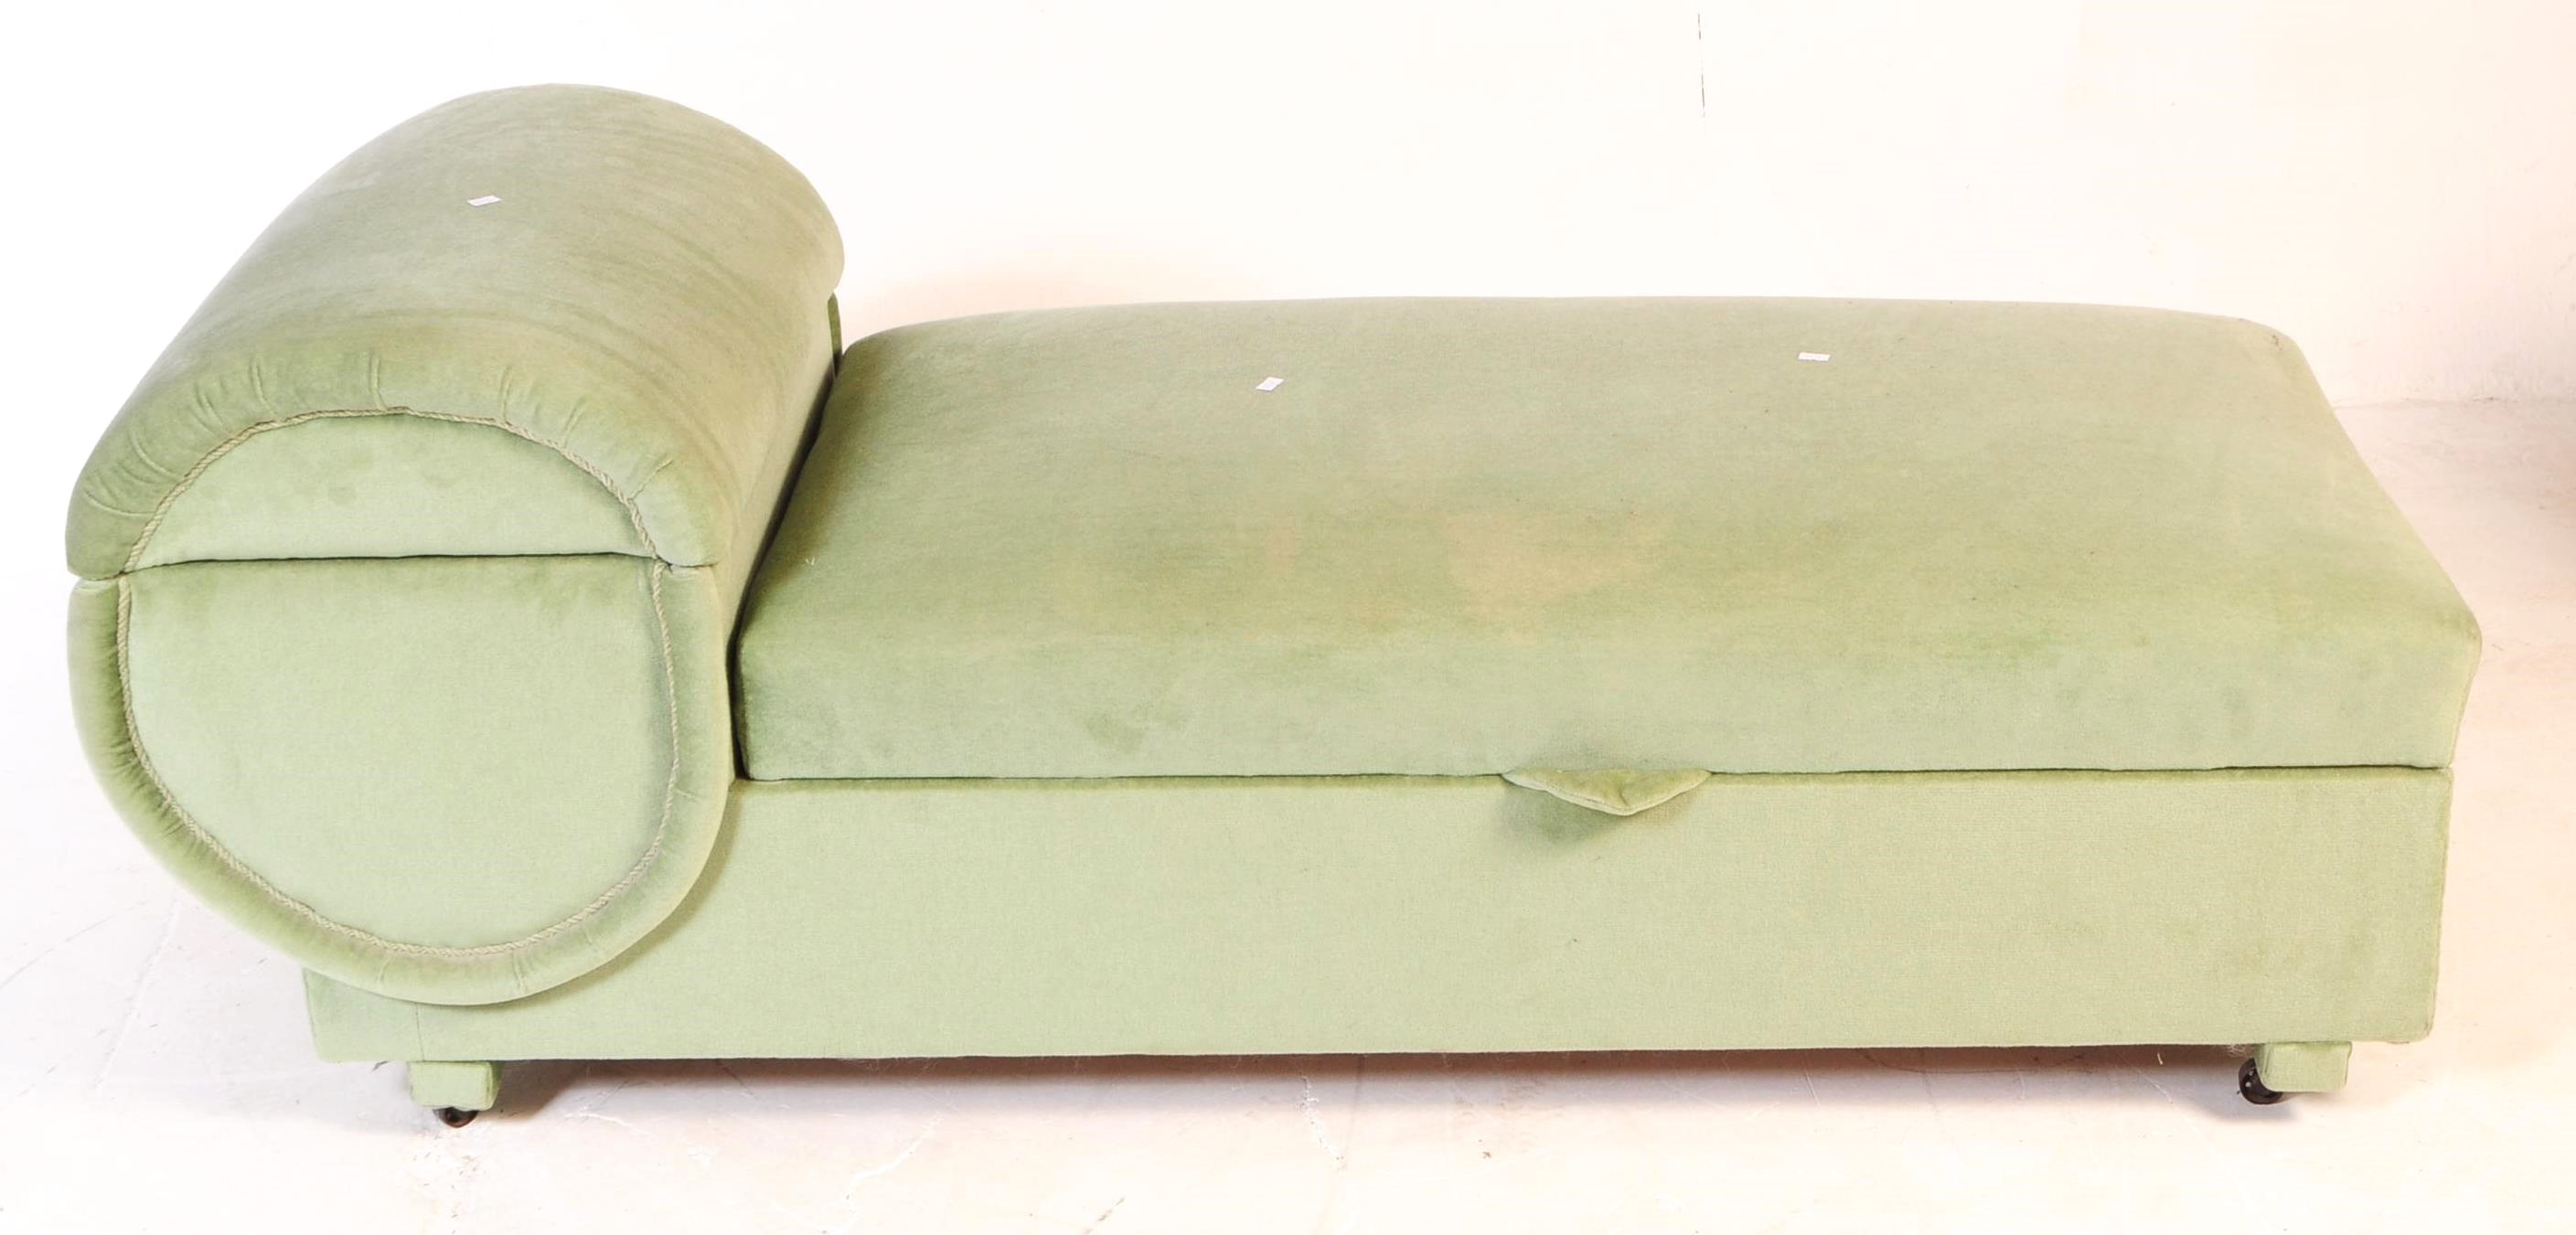 ART DECO 20TH CENTURY CHAISE LONGUE OTTOMAN DAY BED